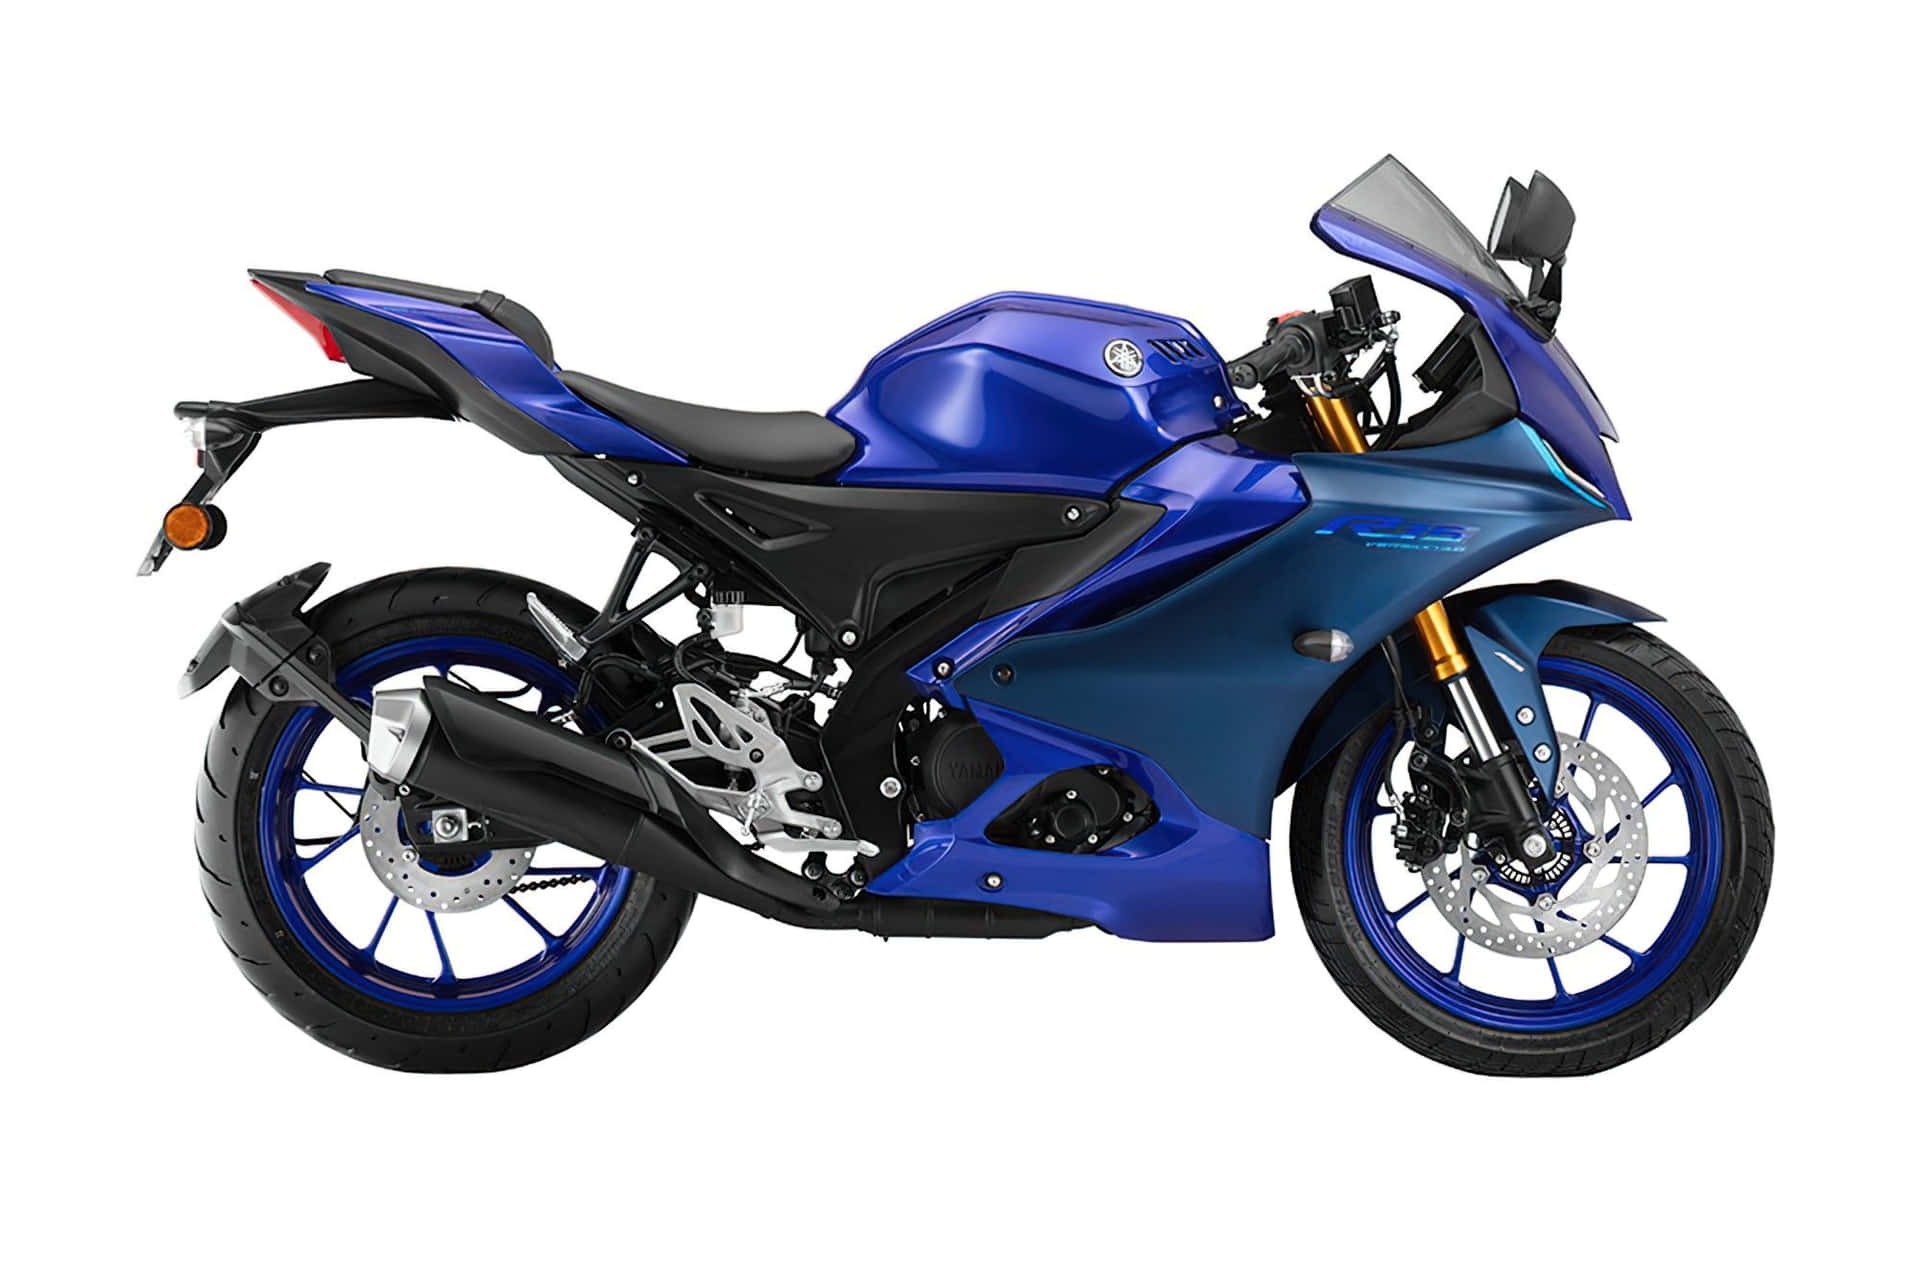 A Blue Motorcycle Is Shown Against A White Background